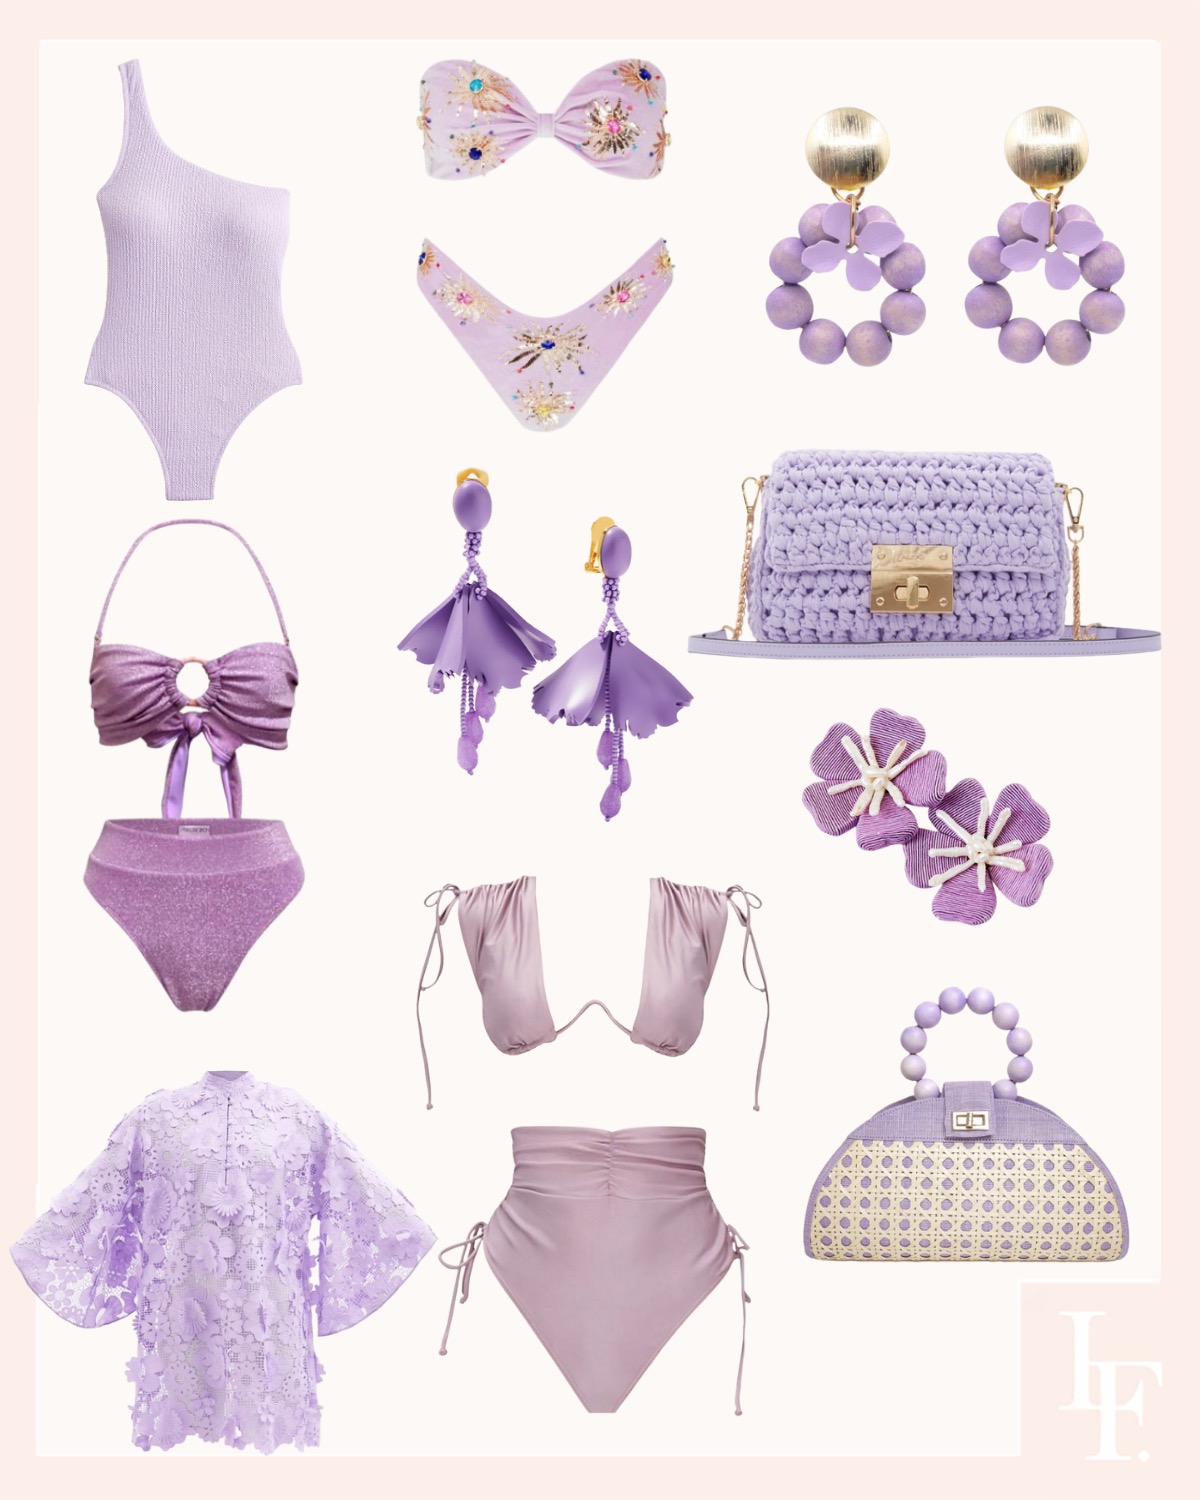 Isla Mujeres Lilac swimsuit round up, vacation travel style inspiration. By Veronica Levy, Lombard and Fifth.